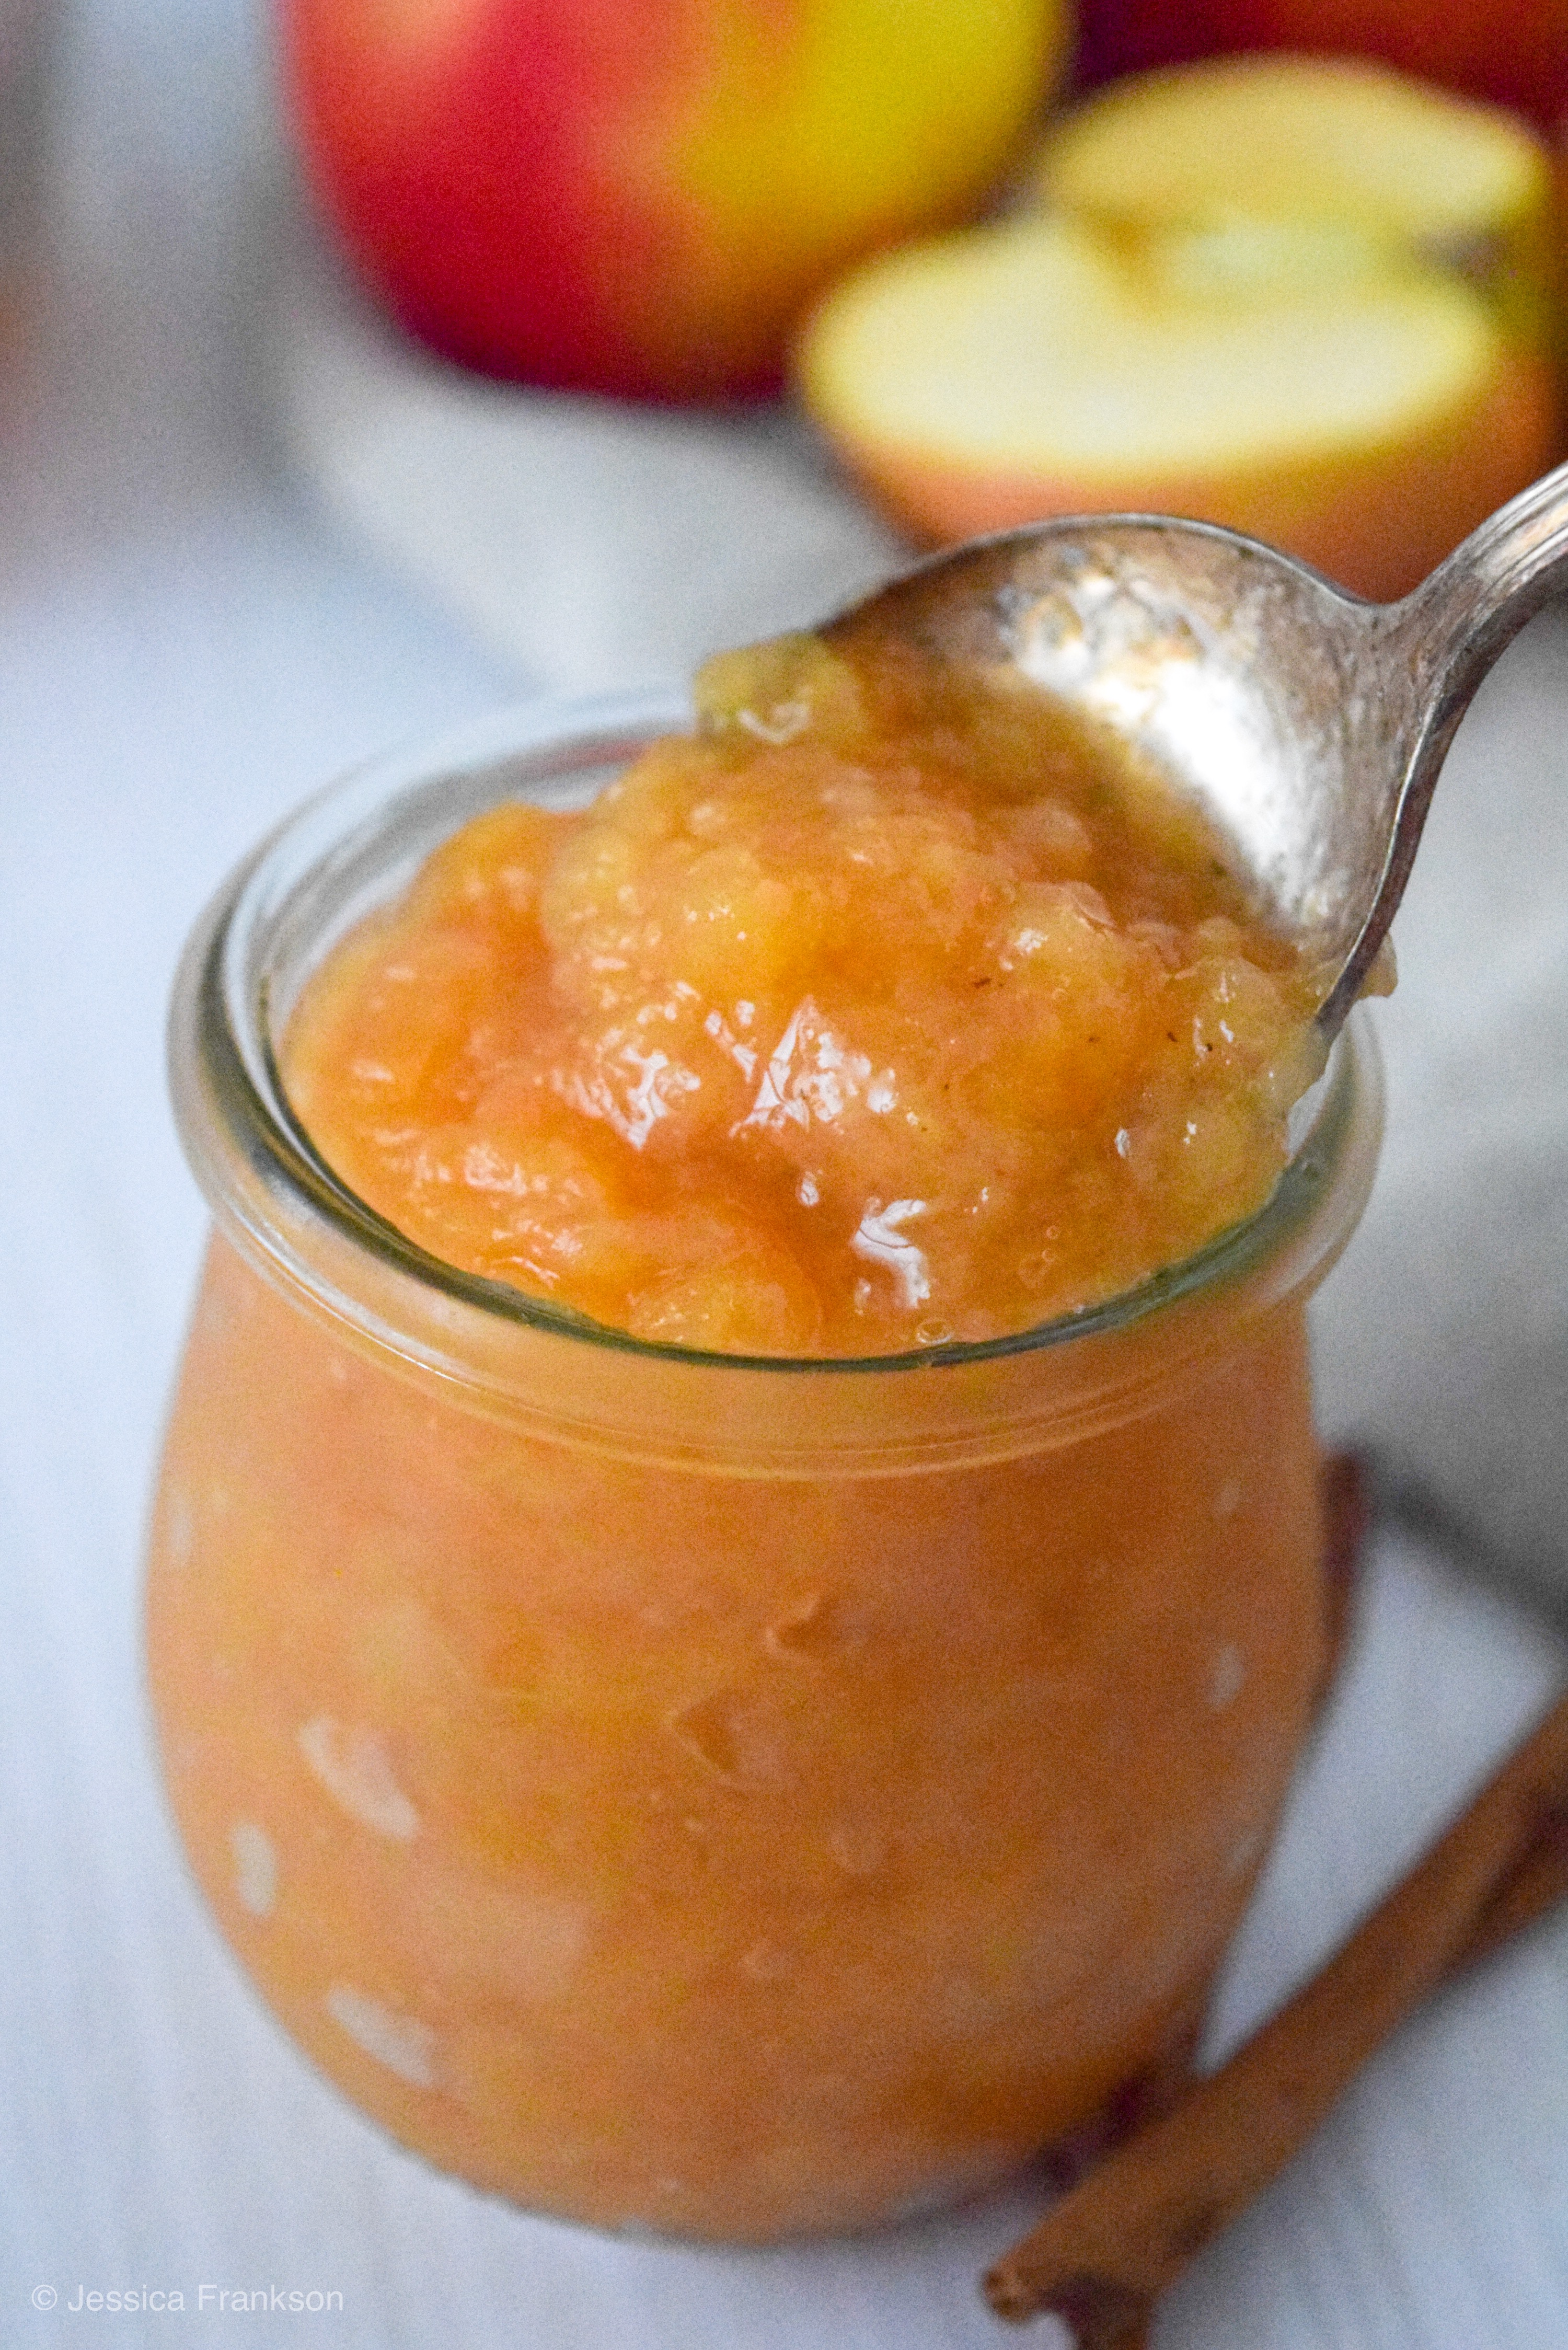 Once you try this Homemade Sugar-Free Cinnamon Applesauce, you'll never go back to store-bough! It's seriously so good and so easy to make in the slow cooker or Instant Pot! #applesaucerecipe #fallrecipe #sugarfree #paleo